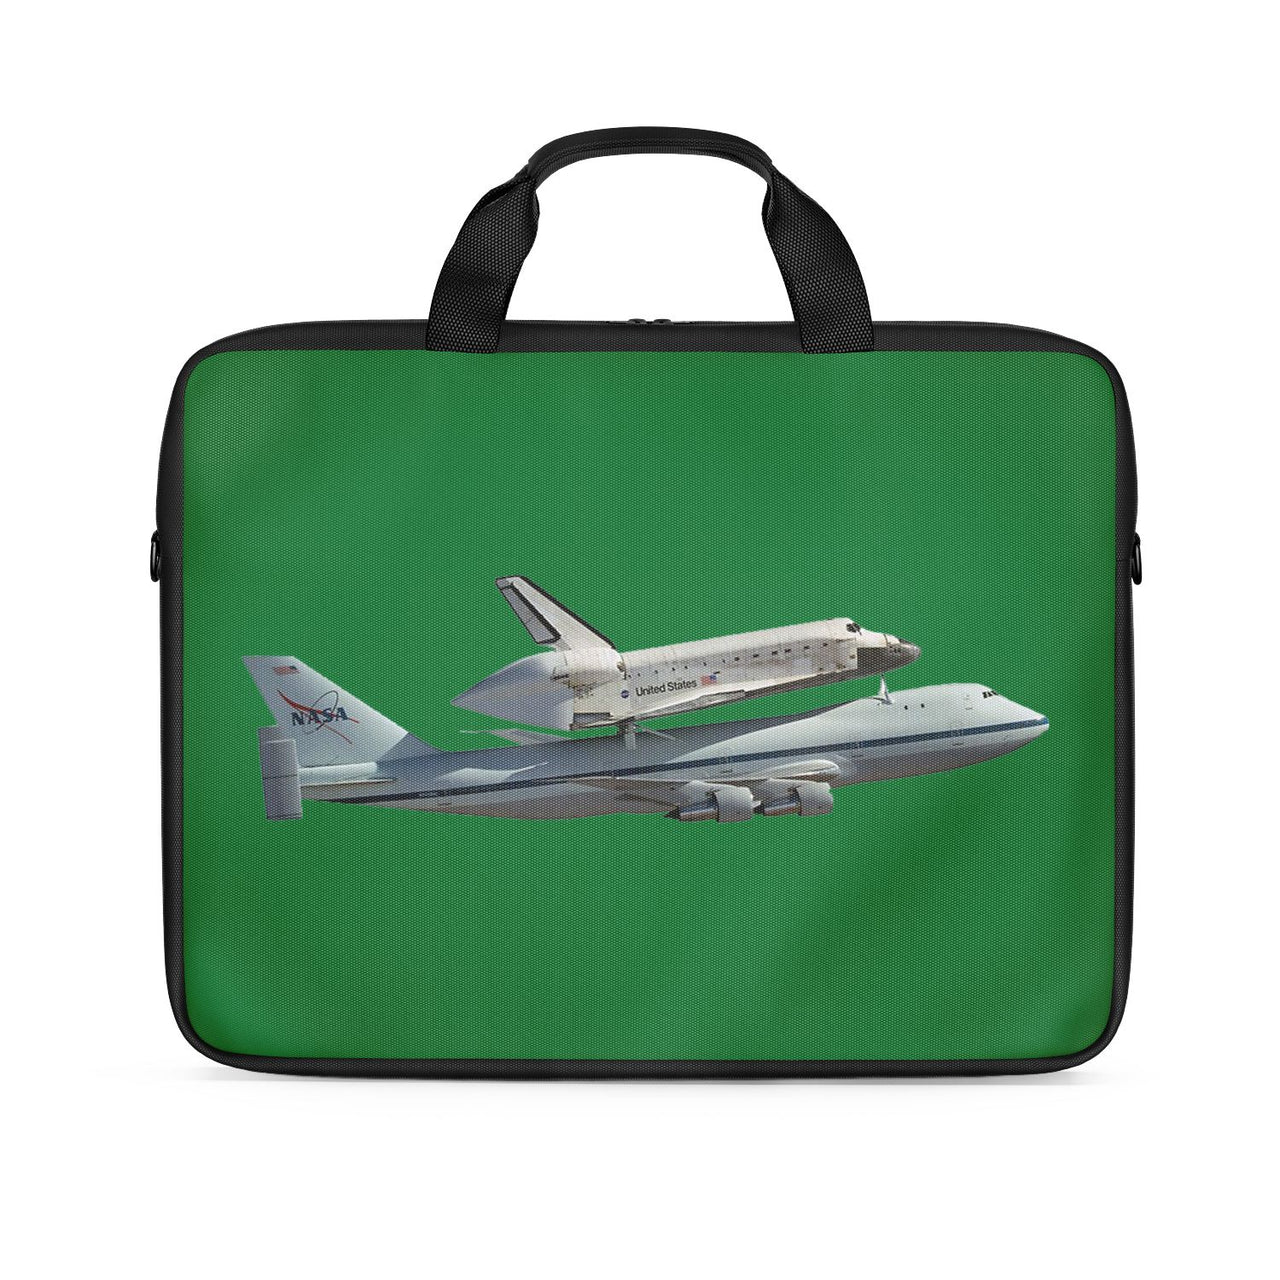 Space shuttle on 747 Designed Laptop & Tablet Bags